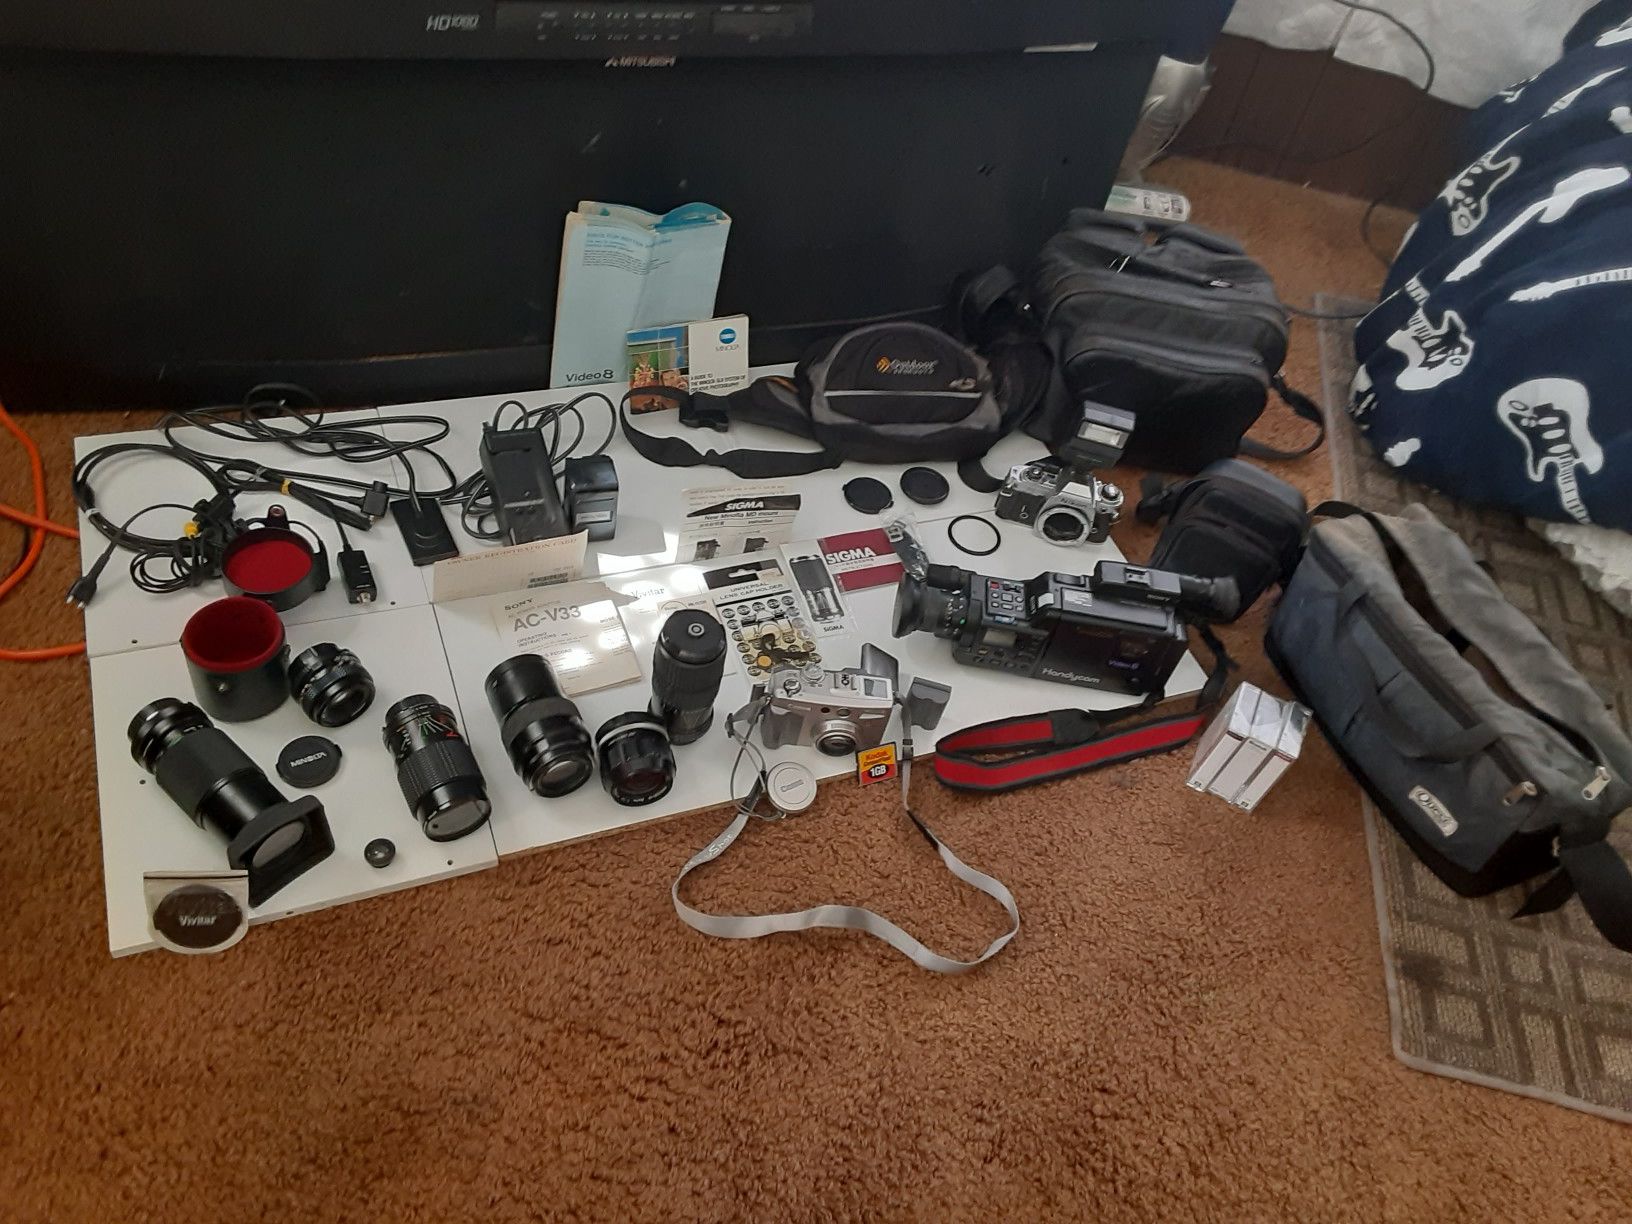 $30!!!!!Amazing deal on all my camera equipment!!!